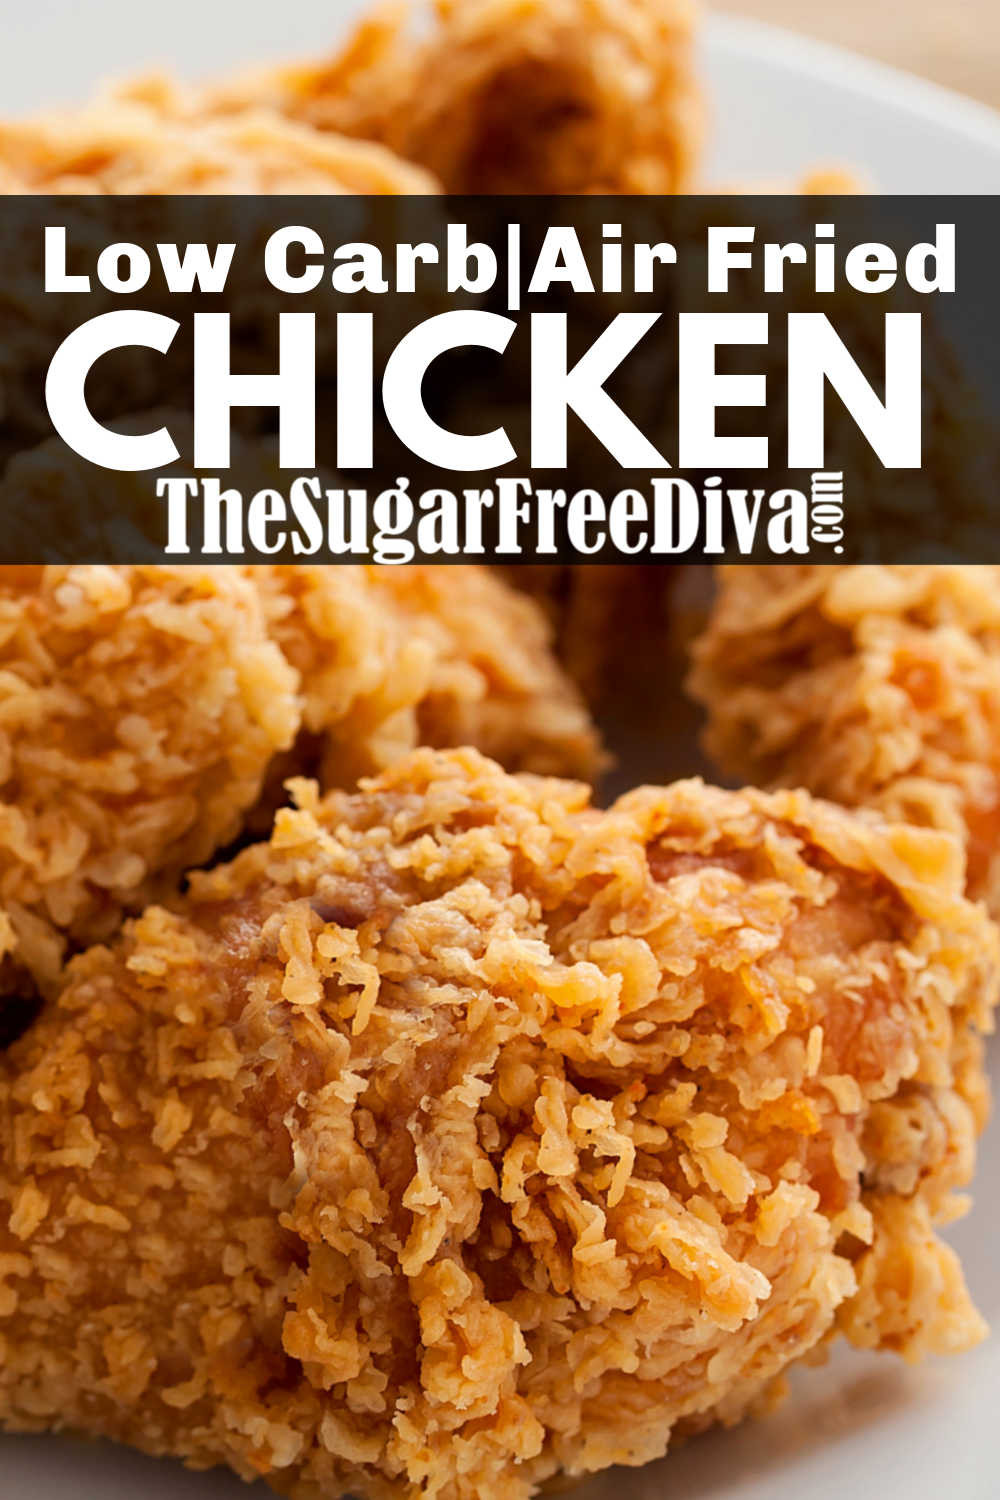 Low Carb Air Fryer Recipes
 The best tasting Low Carb Air Fried Chicken Recipe